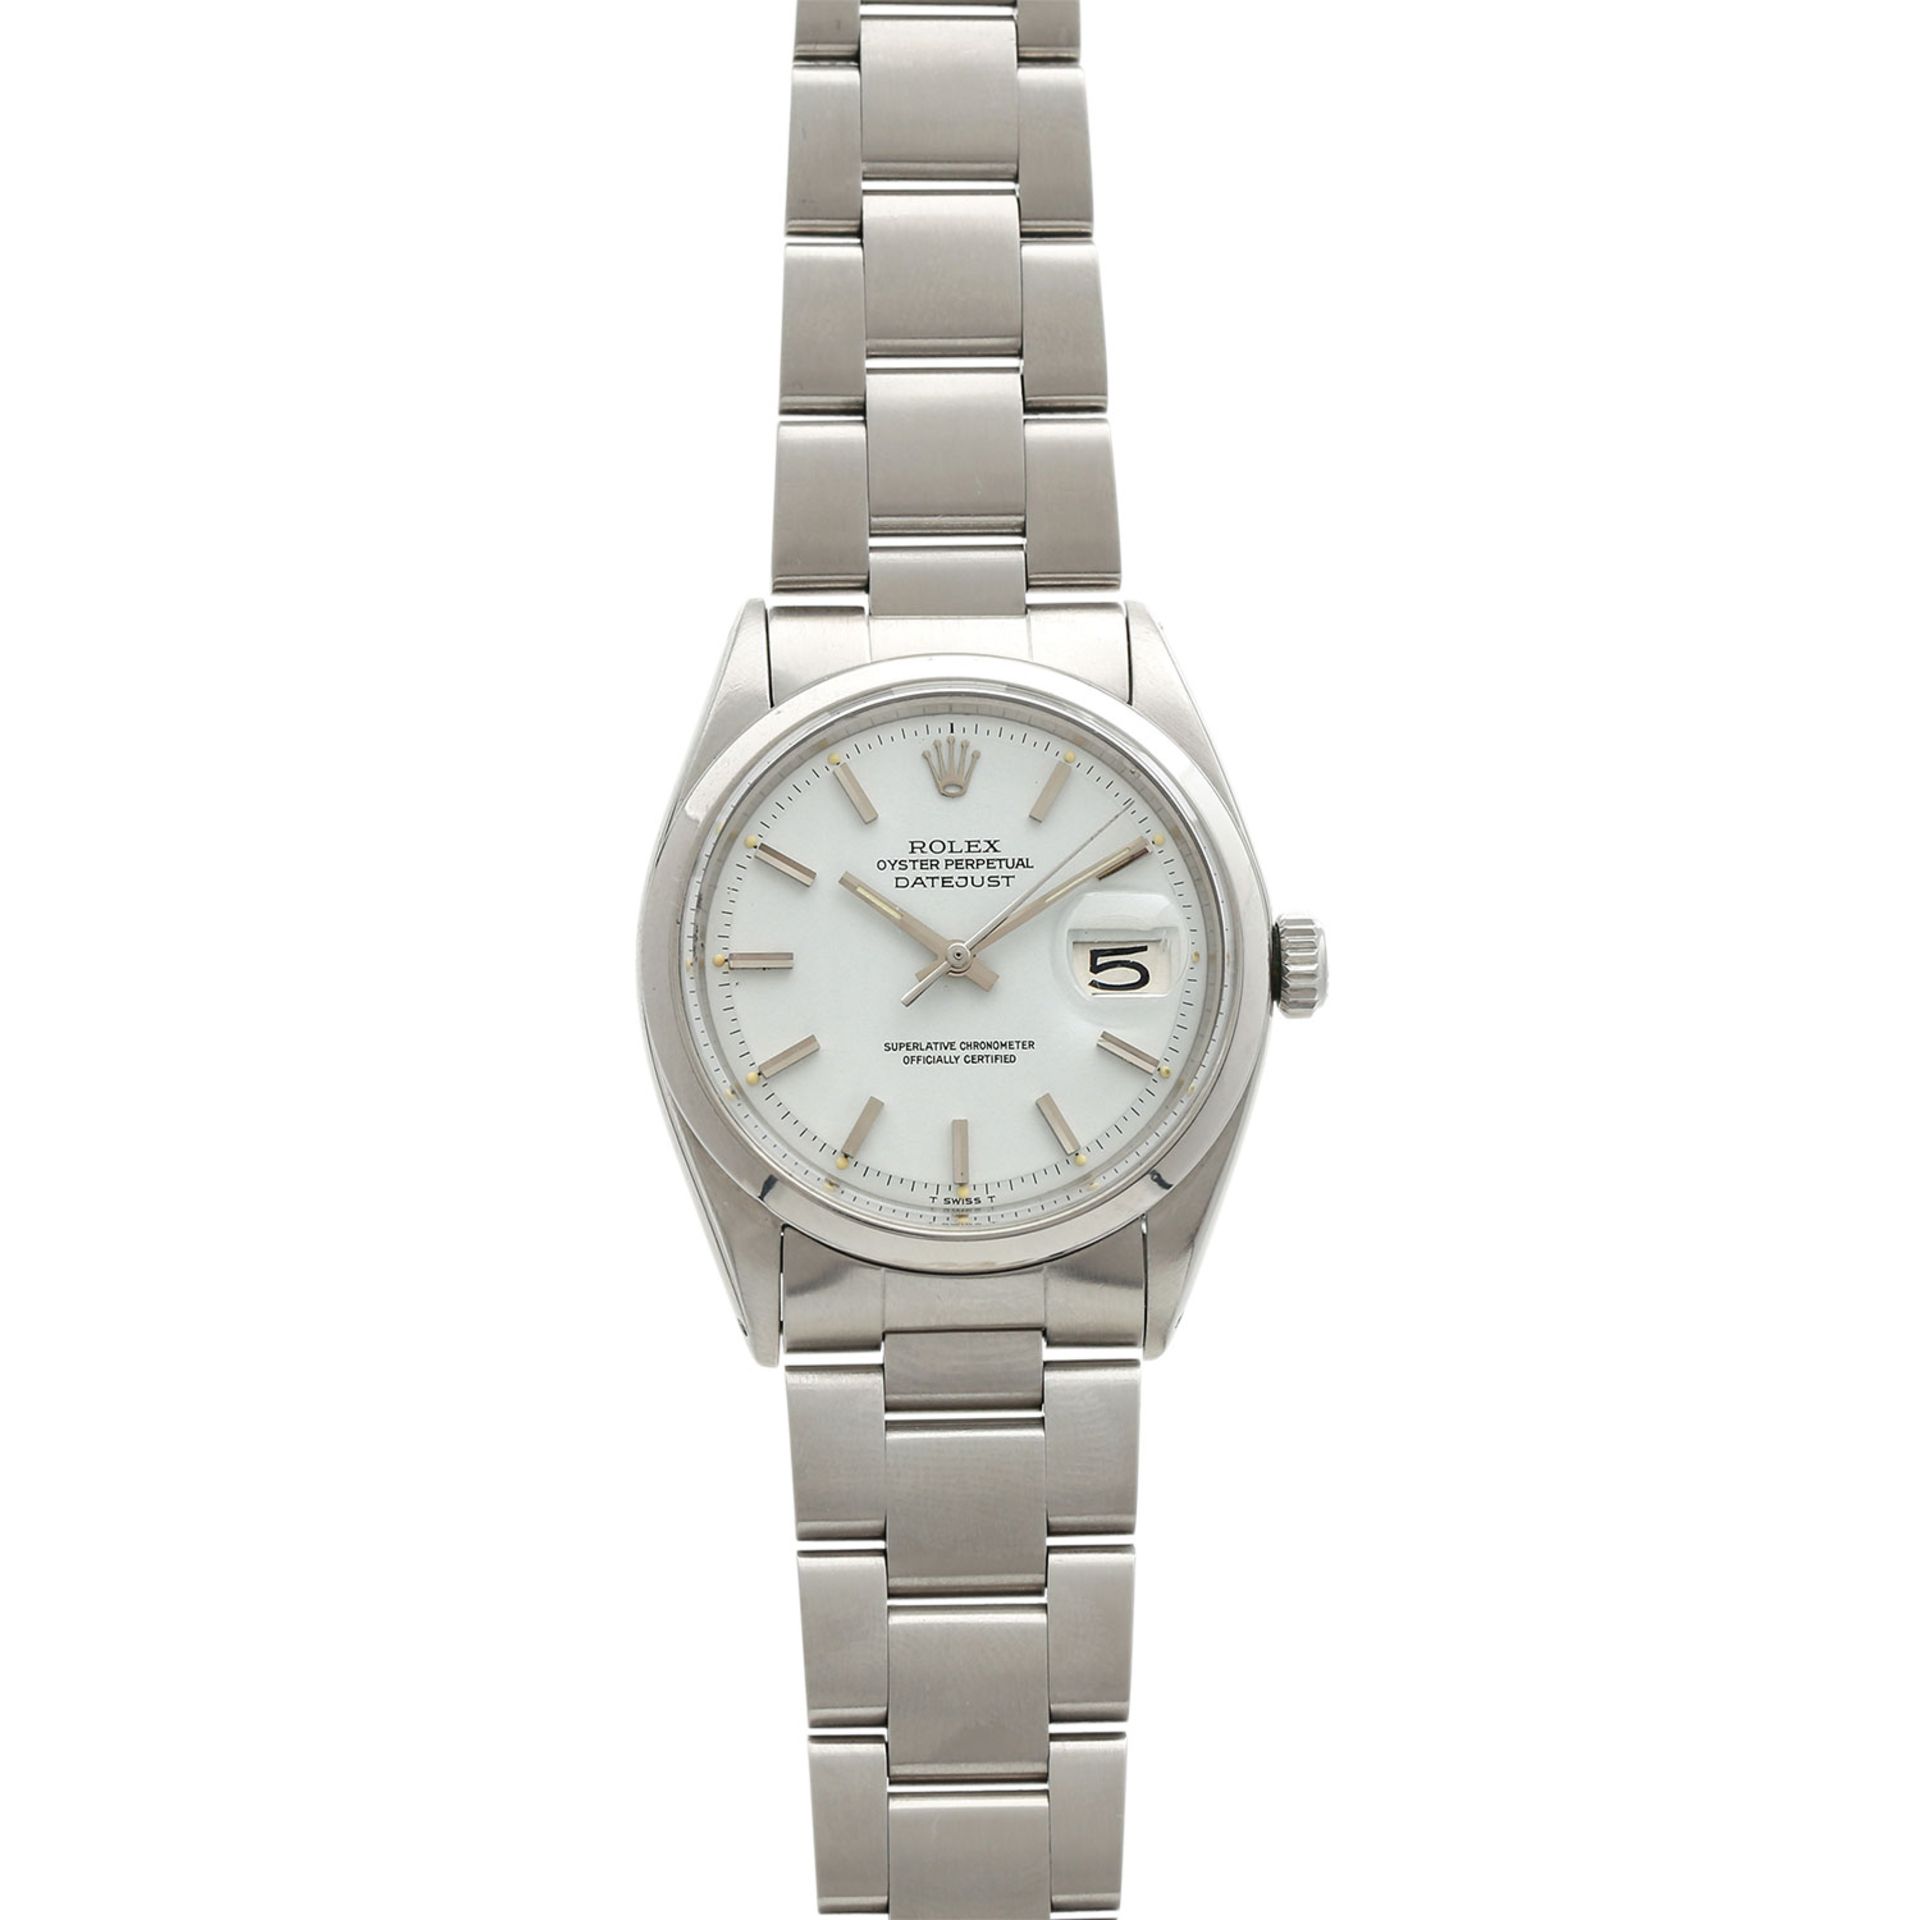 ROLEX Oyster Perpetual Datejust White Dial Armbanduhr, Ref. 1600, ca. 1970/80er Jahre.Edelstahl.